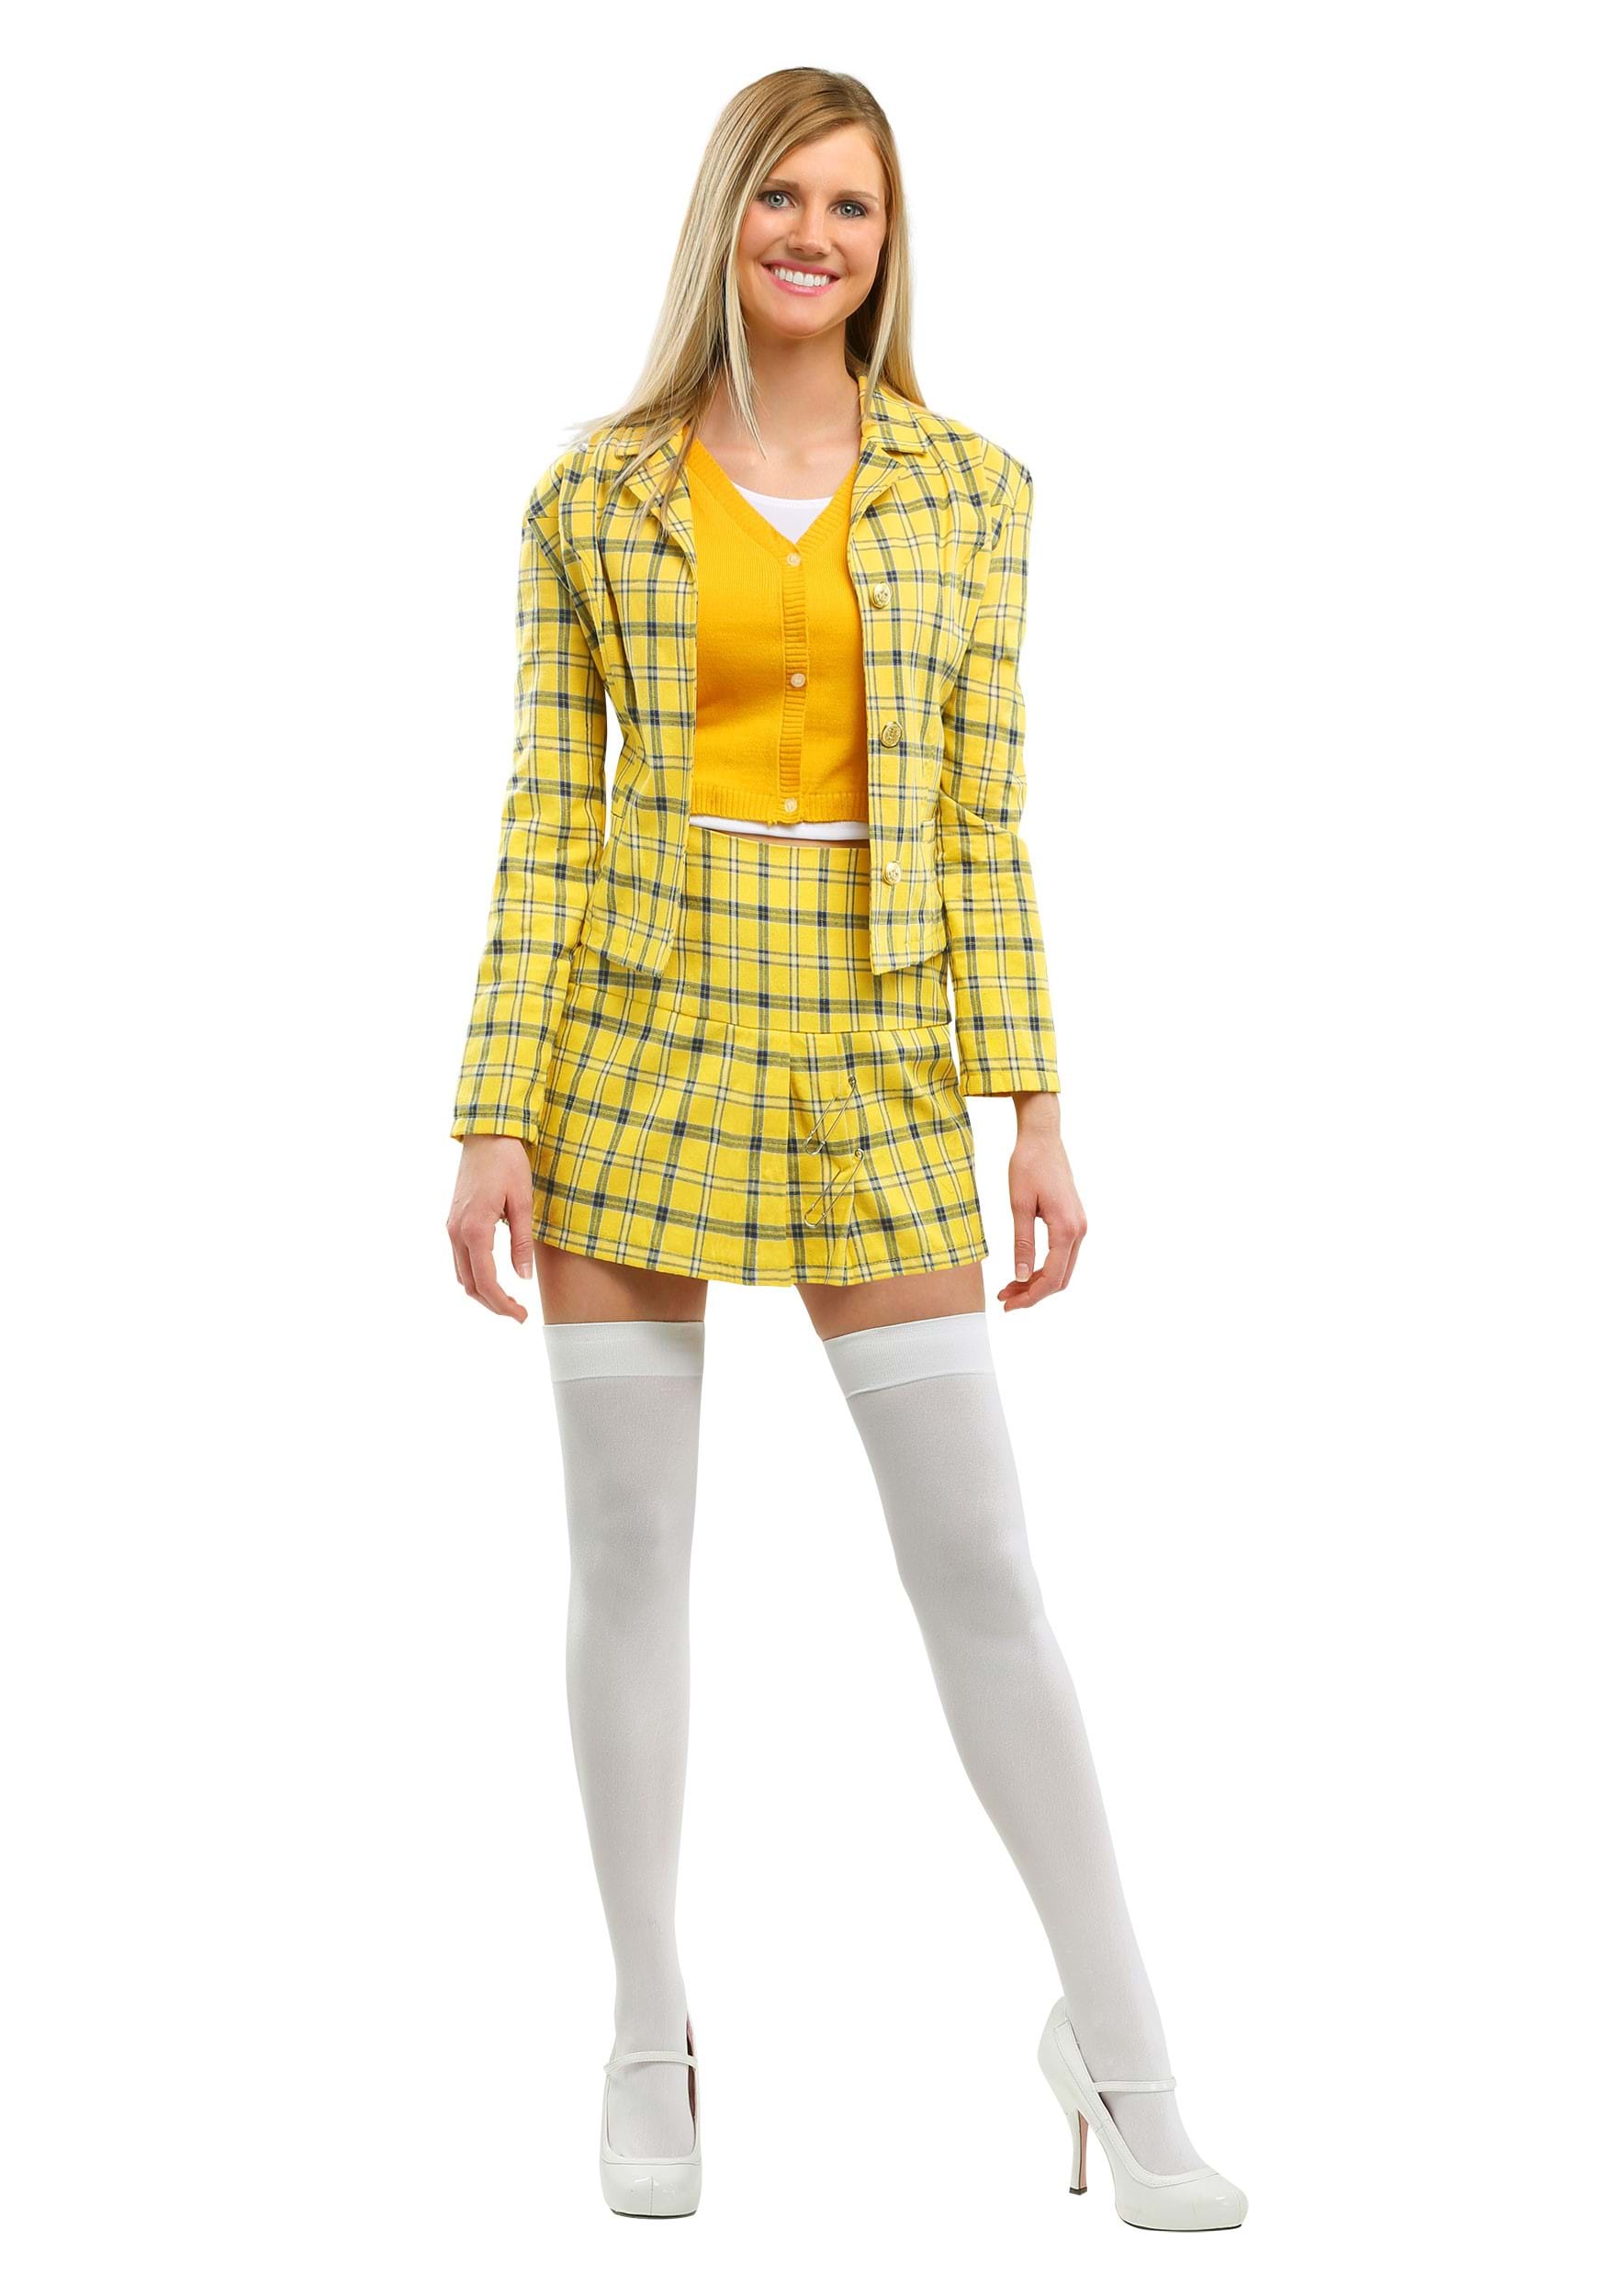 Cher Costume from Clueless | Exclusive | Made By Us